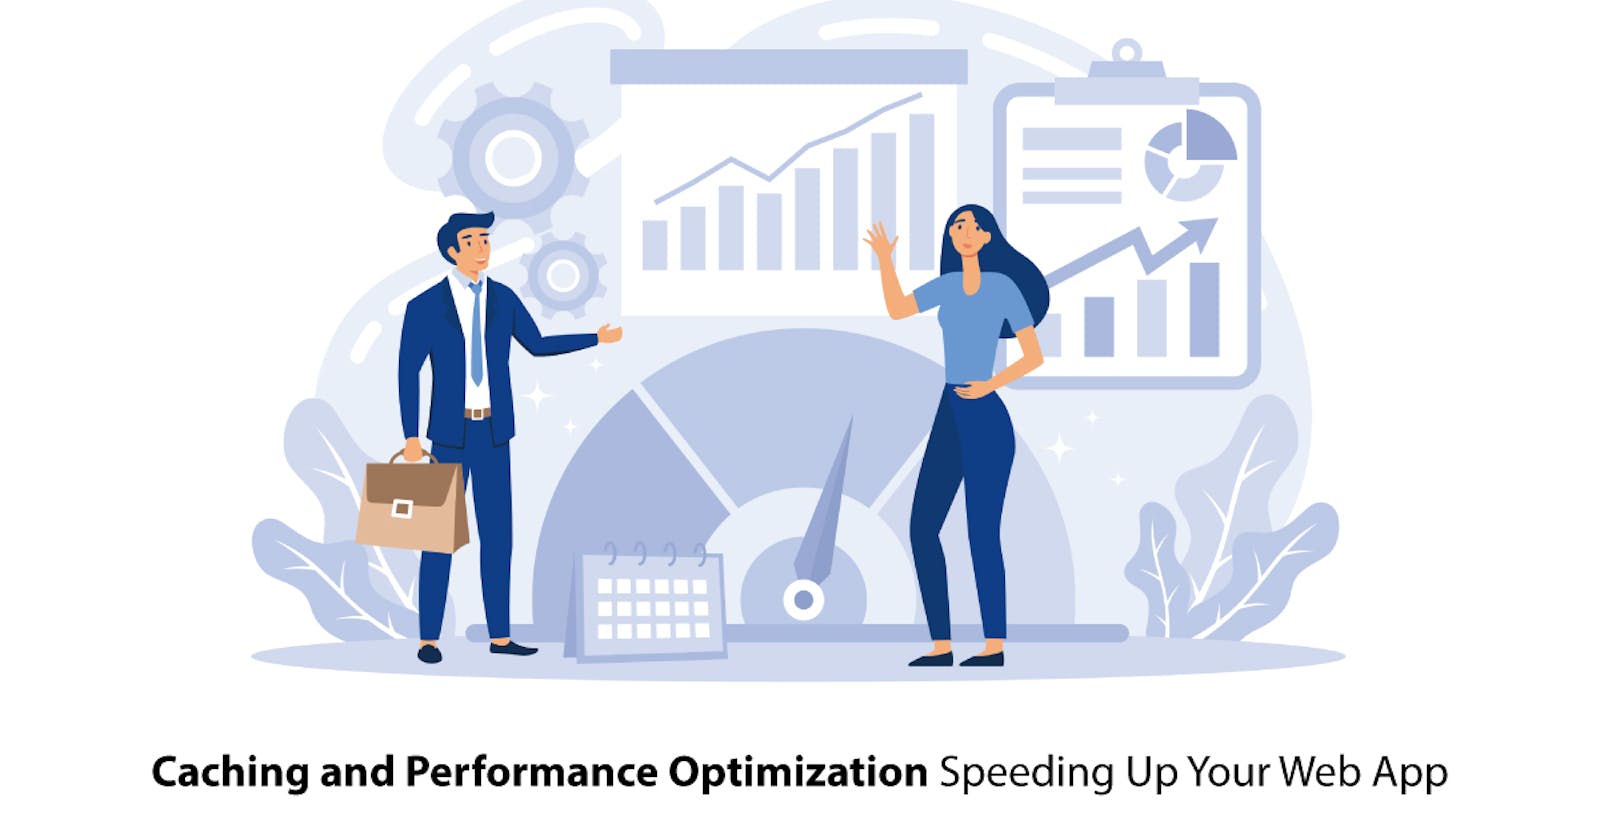 Caching and Performance Optimization: Speeding Up Your Web App